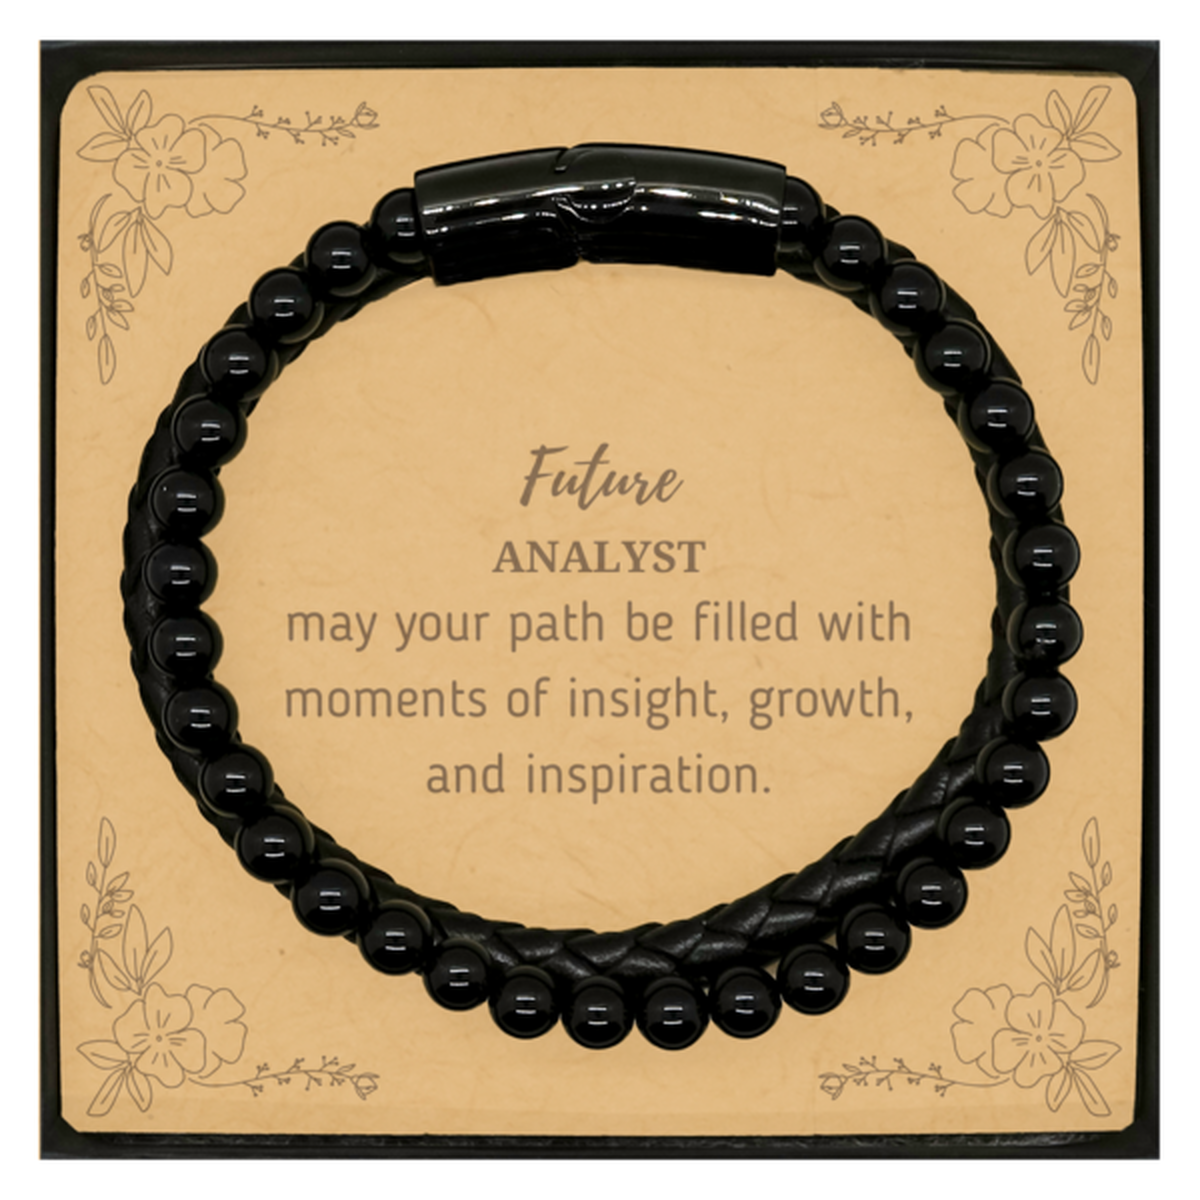 Future Analyst Gifts, May your path be filled with moments of insight, Graduation Gifts for New Analyst, Christmas Unique Stone Leather Bracelets For Men, Women, Friends